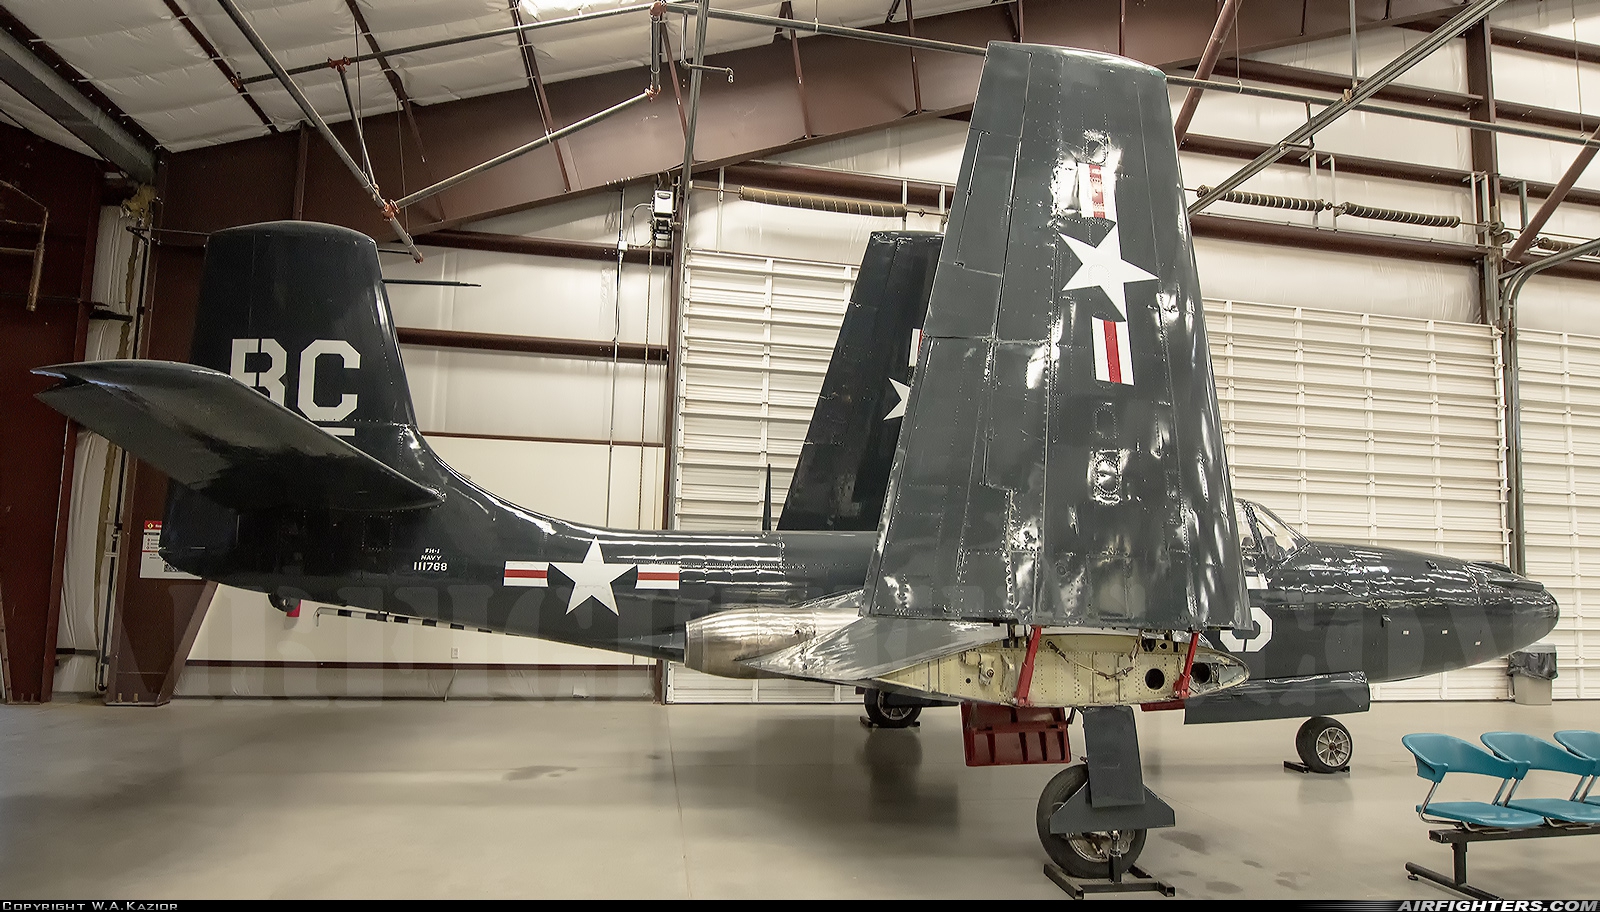 USA - Navy McDonnell FH-1 Phantom (FD-1) 111768 at Tucson - Pima Air and Space Museum, USA